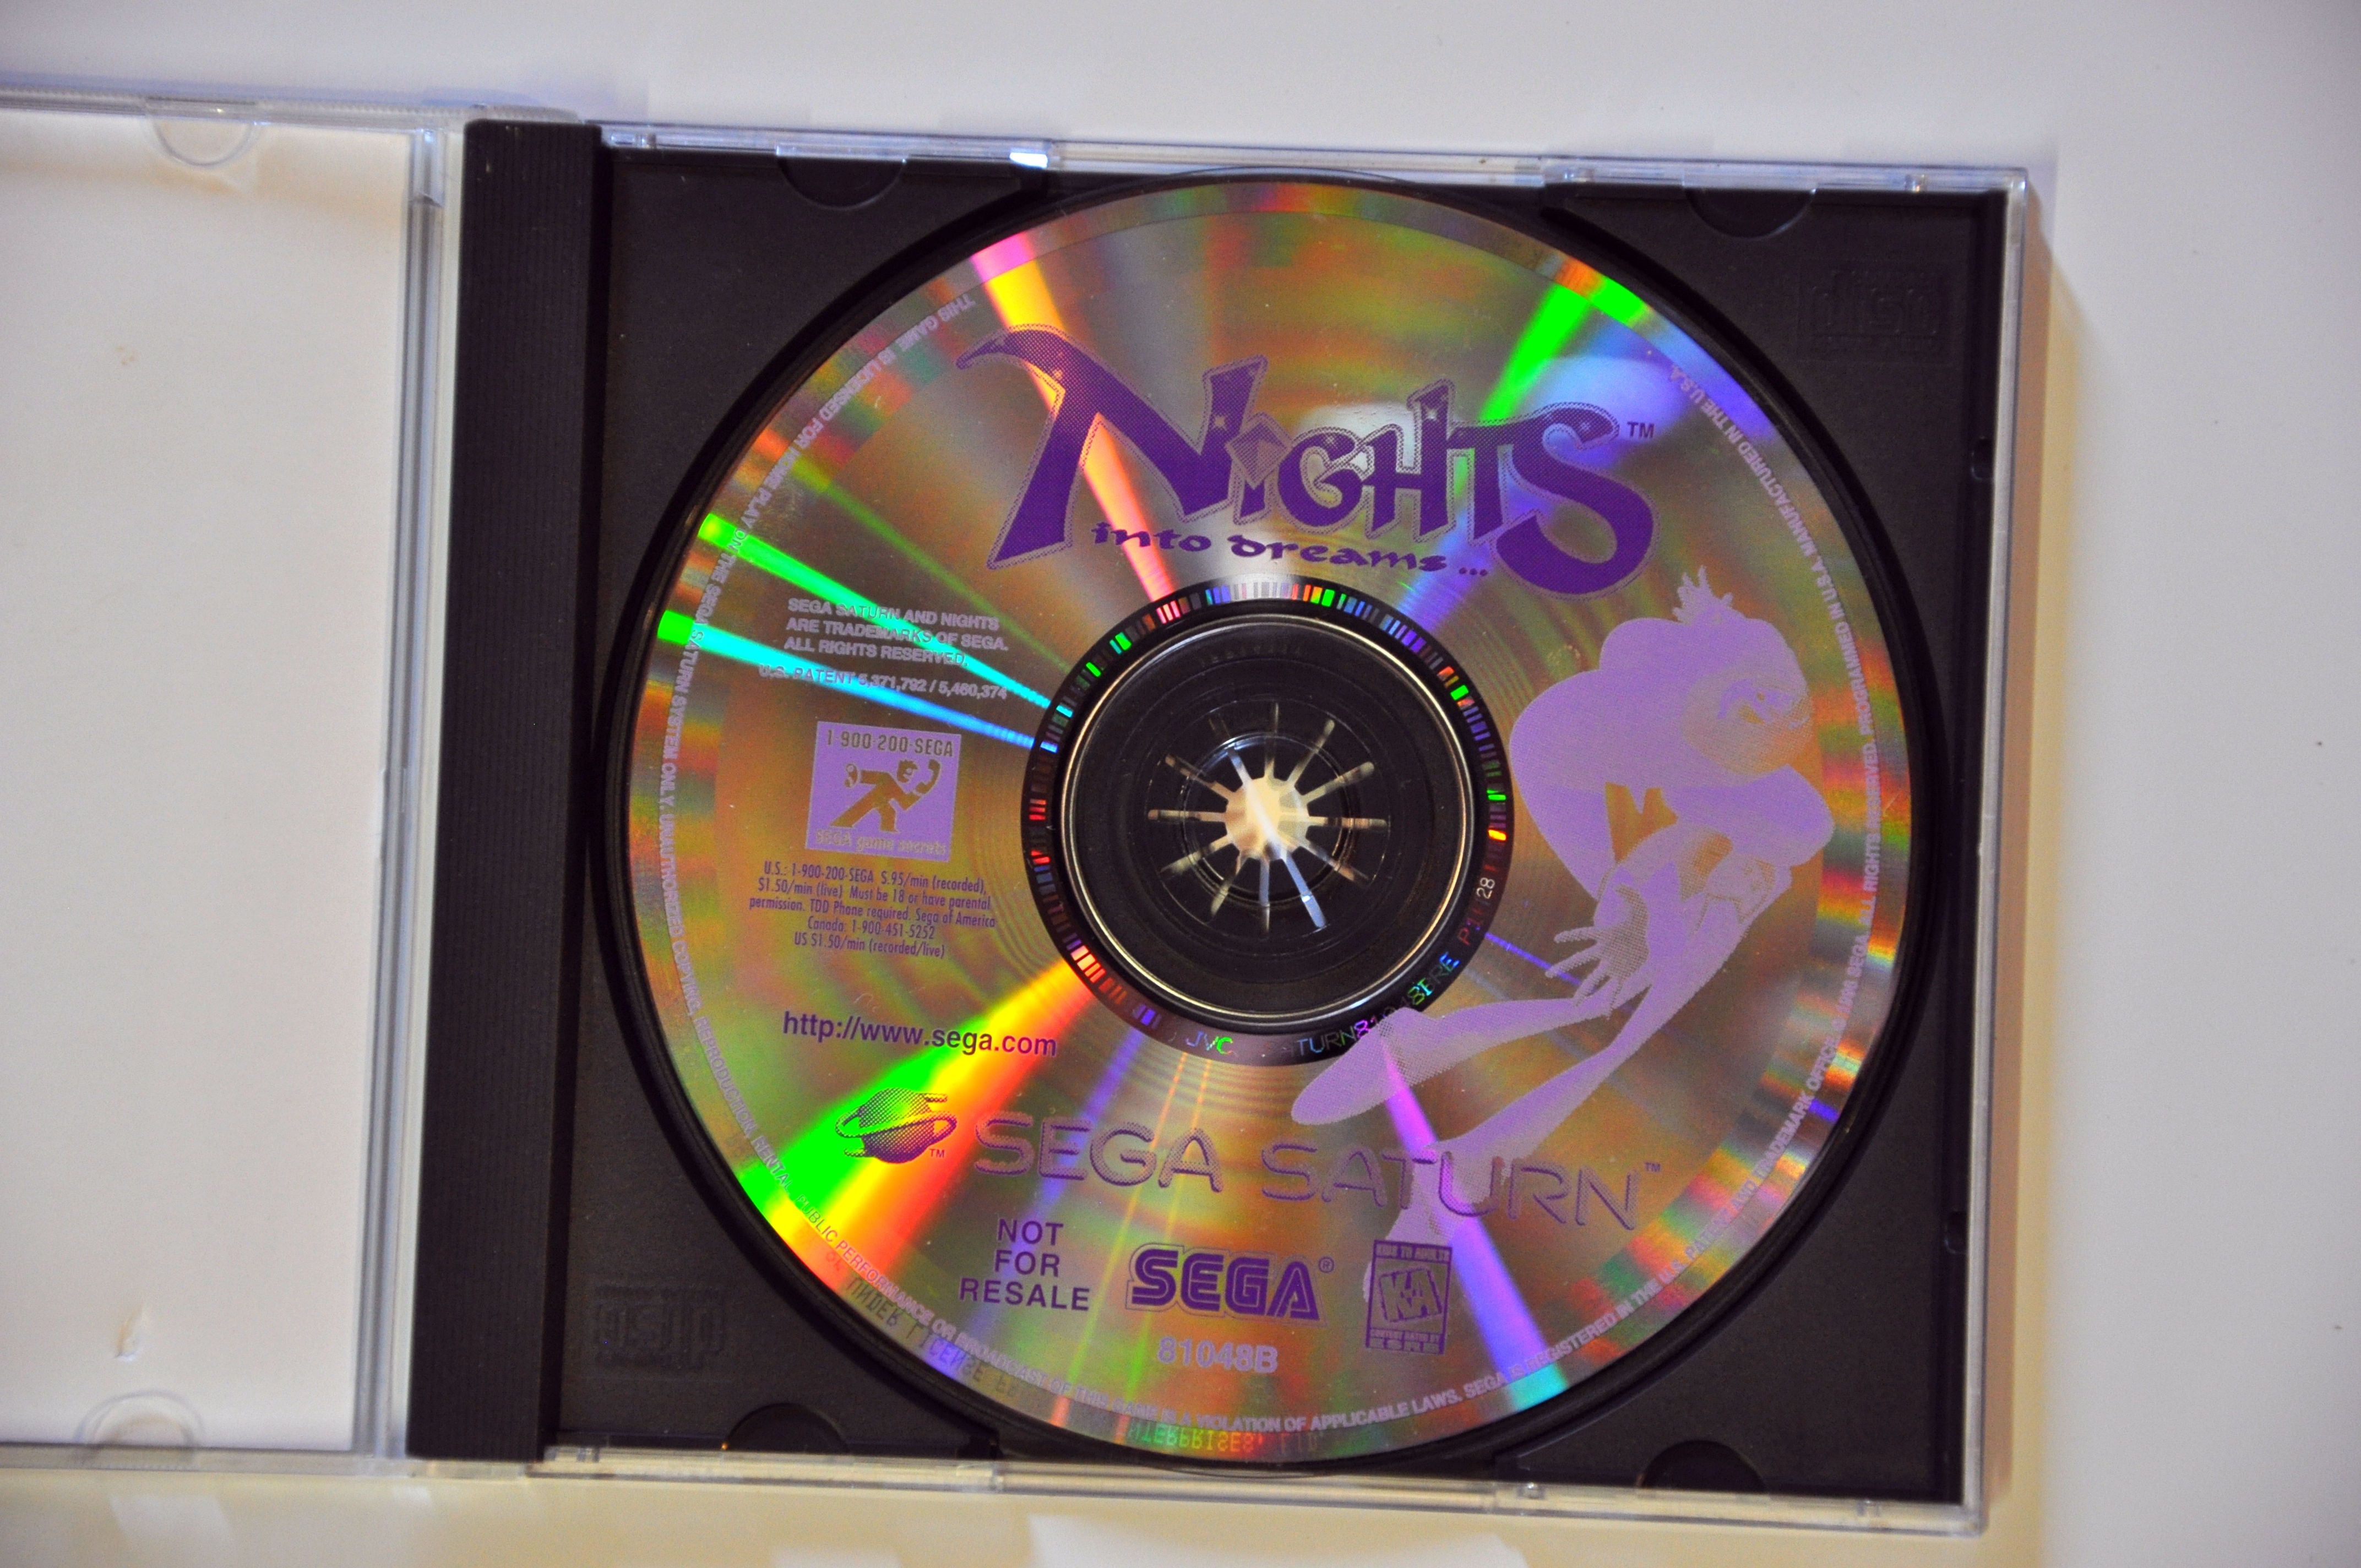 Game | SEGA Saturn | Nights Into Dreams Not for resale edition